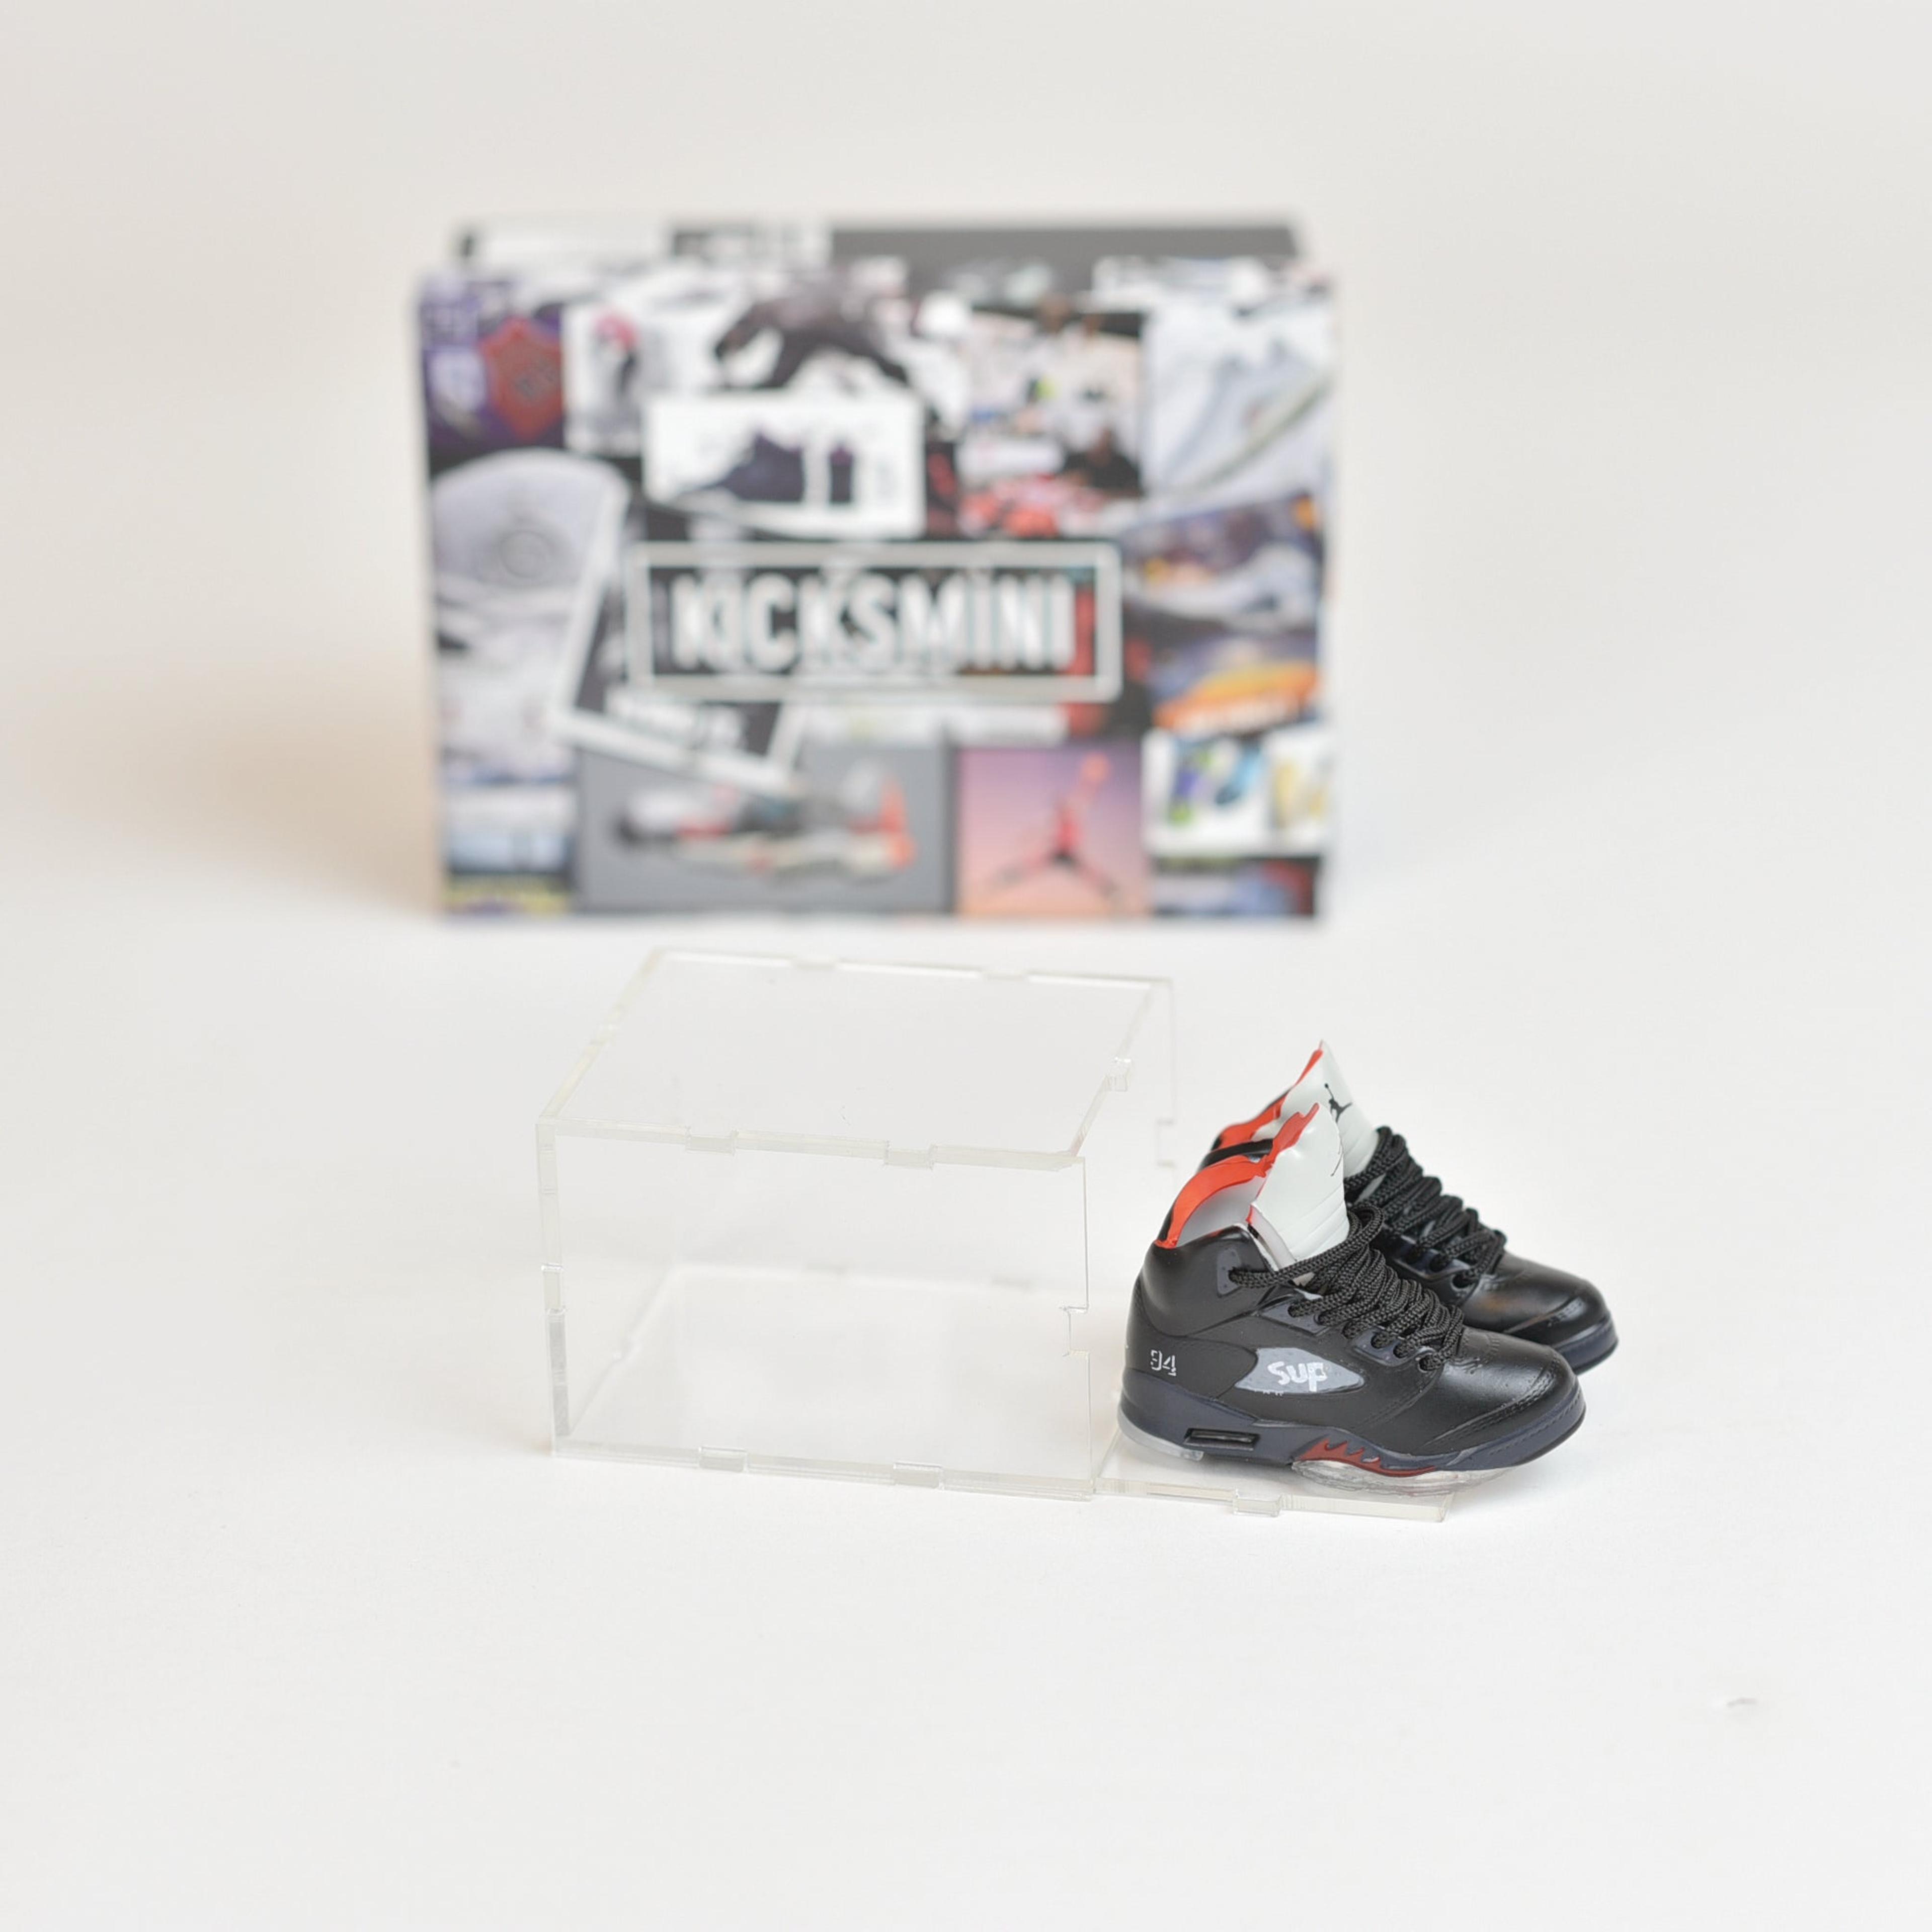 Alternate View 28 of AJ2-AJ13 Mini Sneakers Collection with Display Case